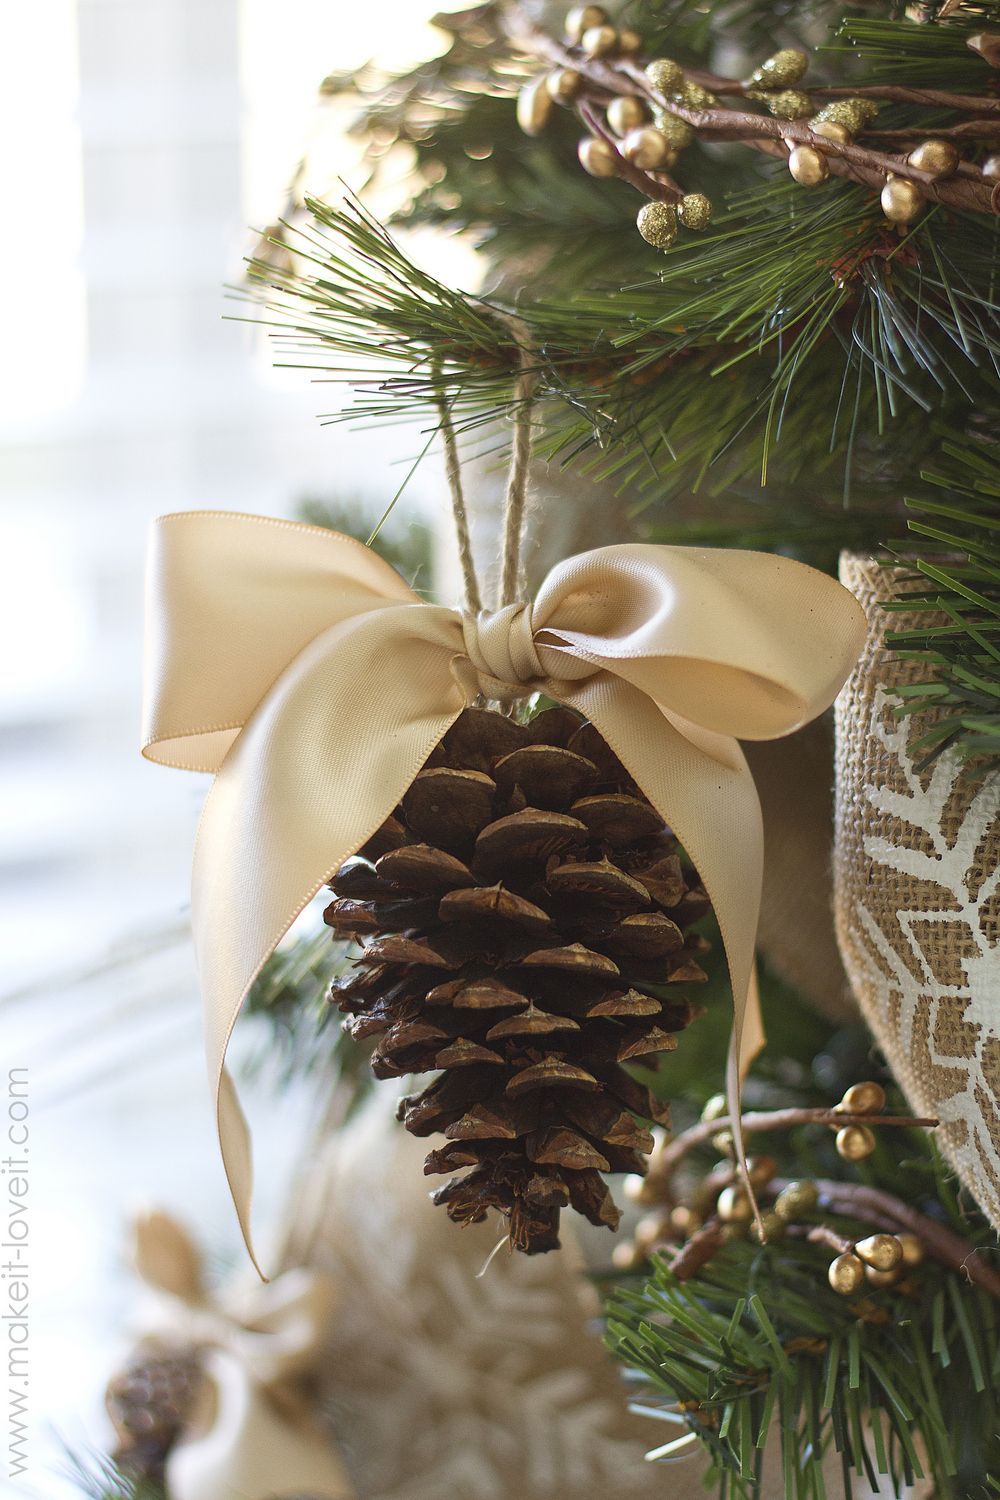 25+ Beautiful Handmade Ornaments -   25 pinecone crafts for children
 ideas